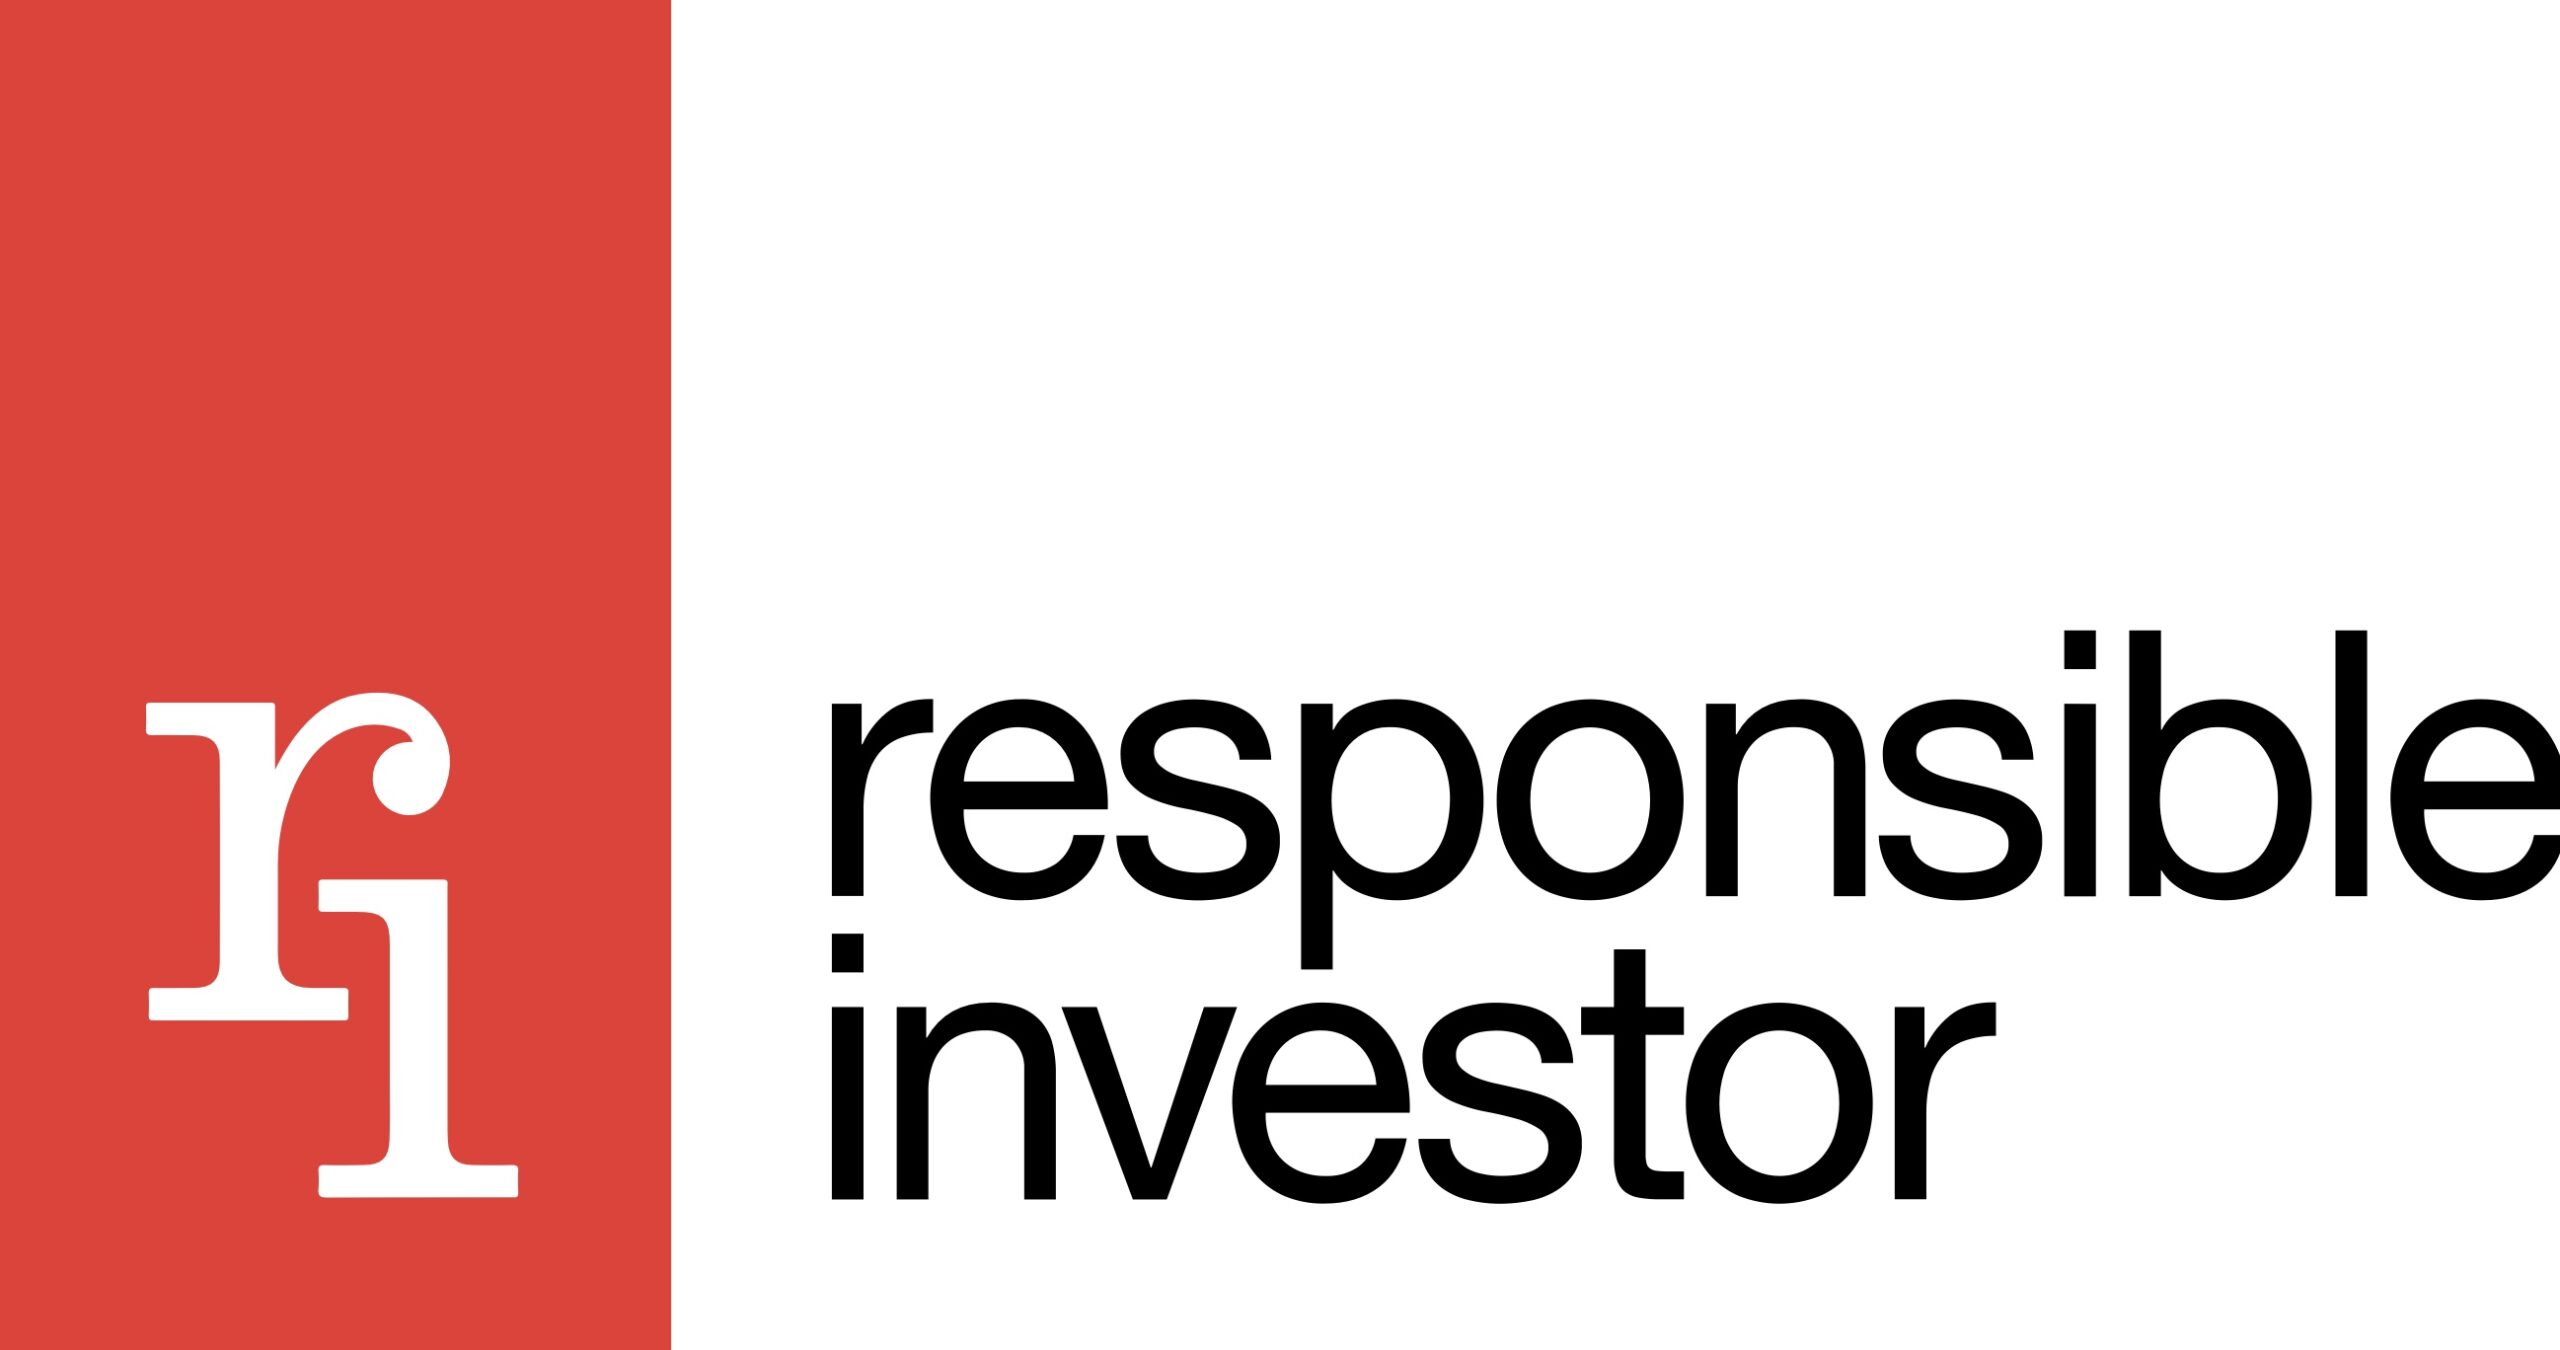 Responsible Investor: ESG Investor “EOPIA Warned on Climate Risks to Infrastructure Investment”